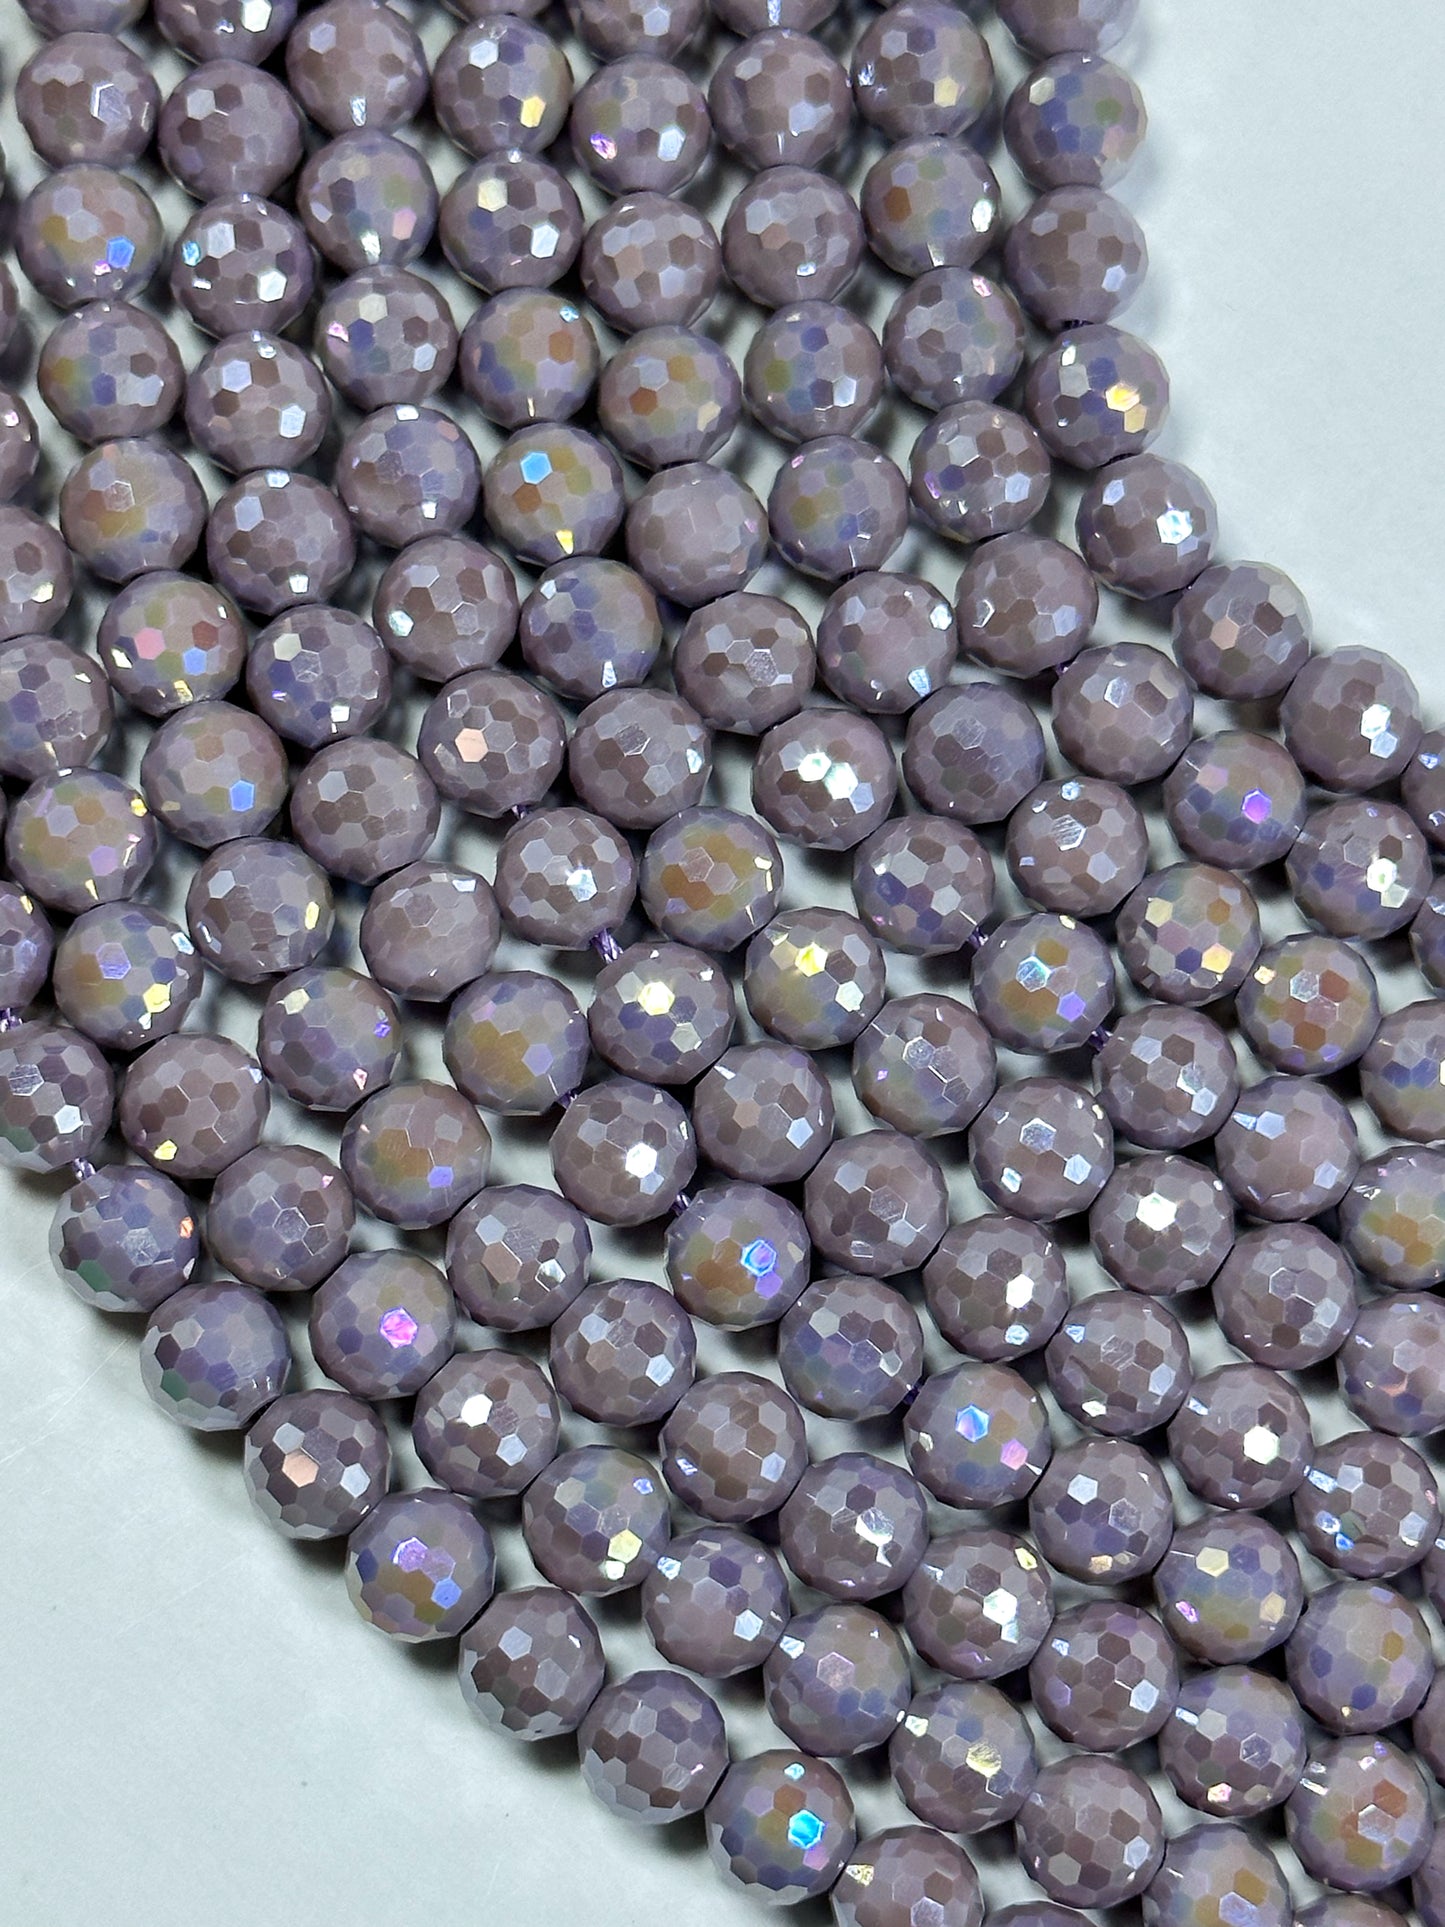 Beautiful Mystic Chinese Crystal Glass Bead Faceted 7.5mm Round Bead, Gorgeous Iridescent Light Purple Color Crystal Great Quality Glass